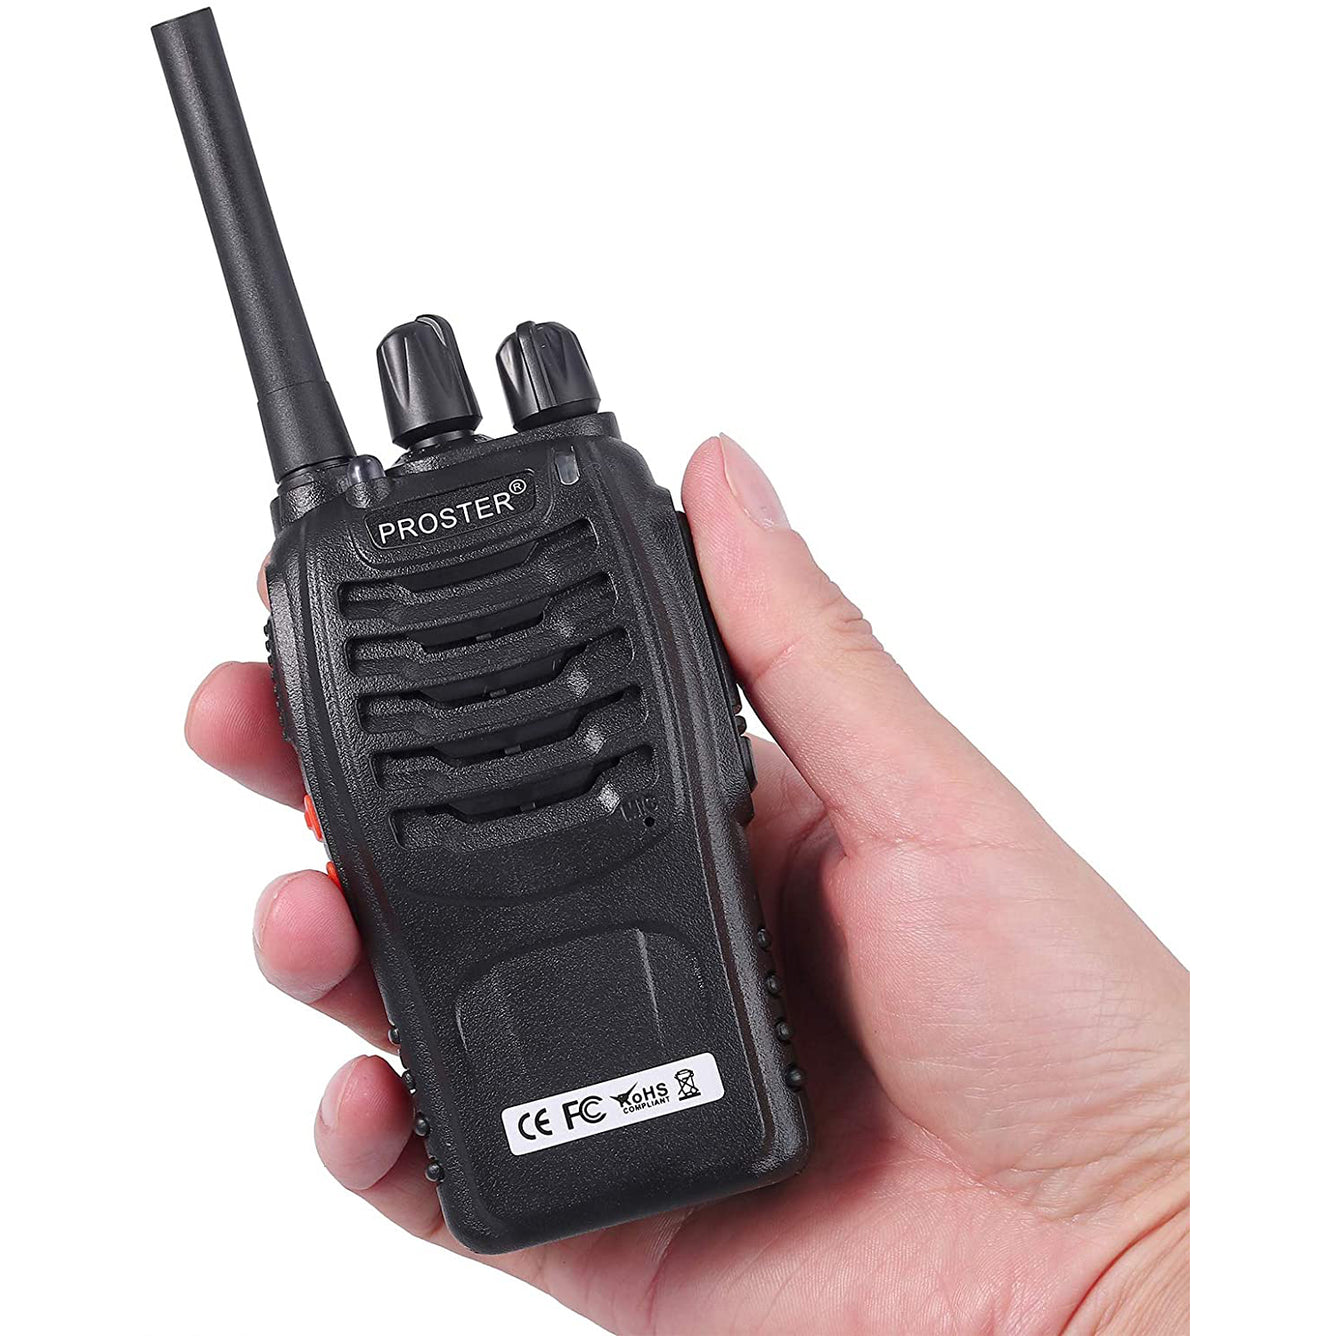 Proster Walkie Talkies 16 Channels with Rechargeable Voice Prompt Walky Talky